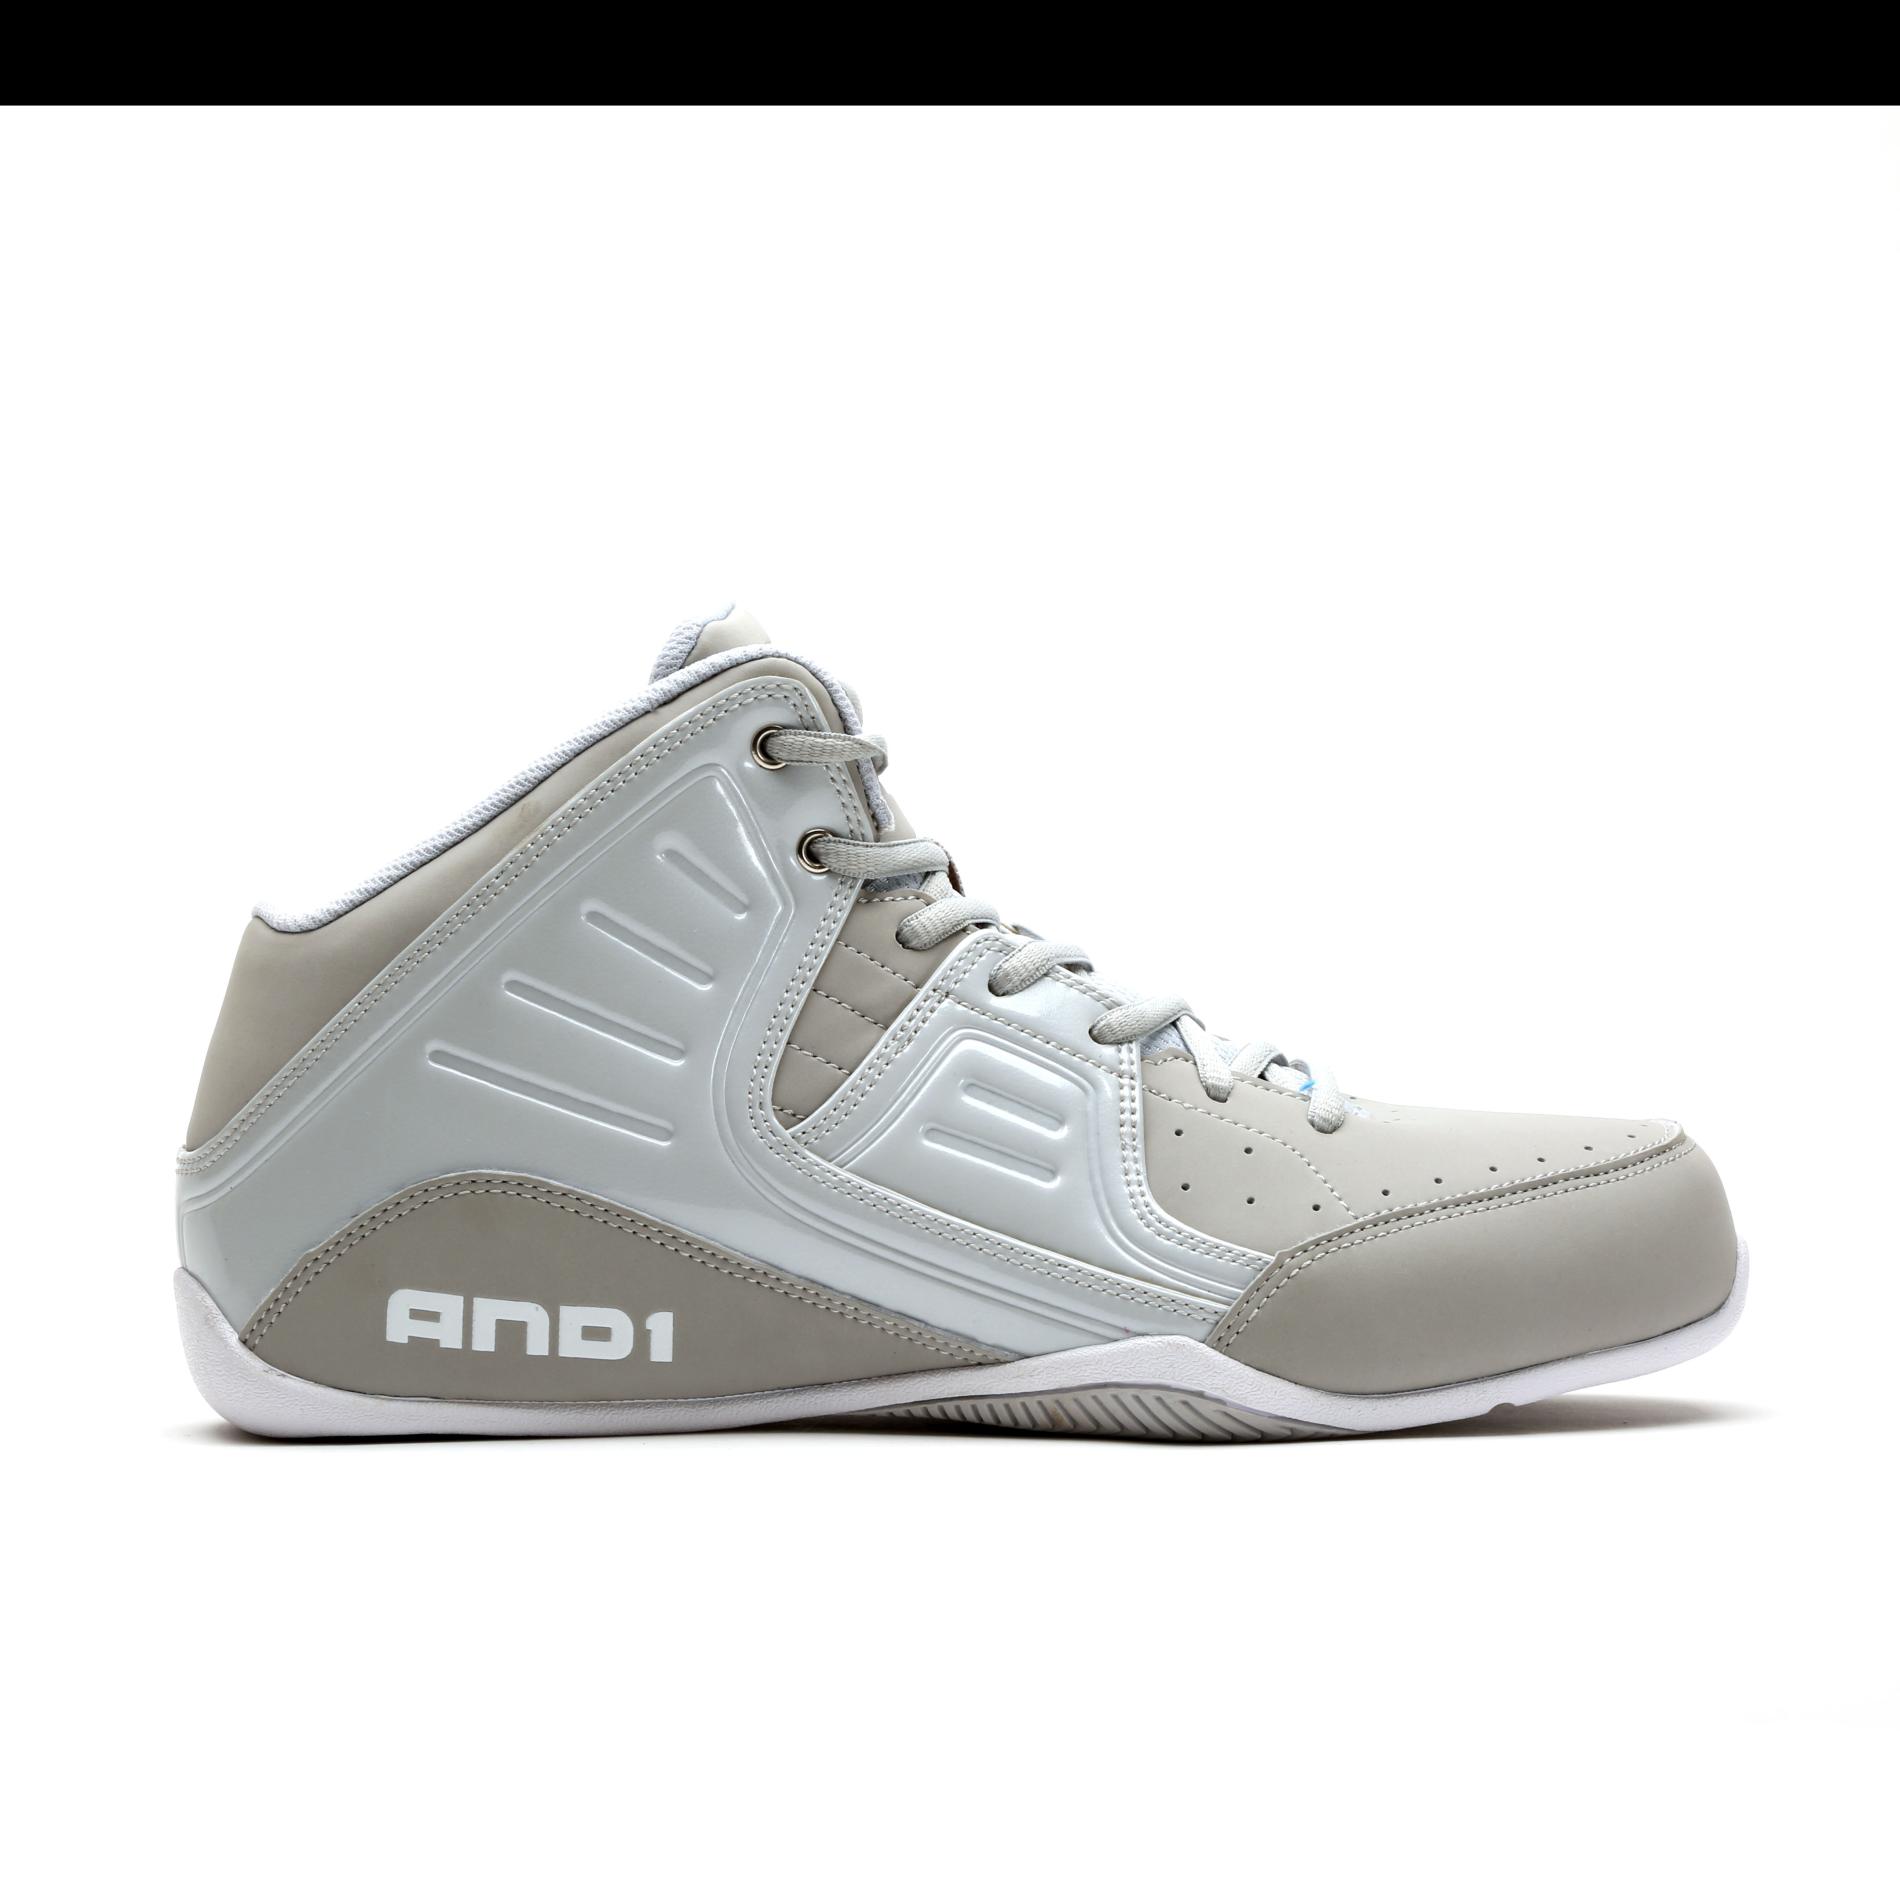 AND 1 Men's Rocket 4 Athletic Shoe - Gray/White